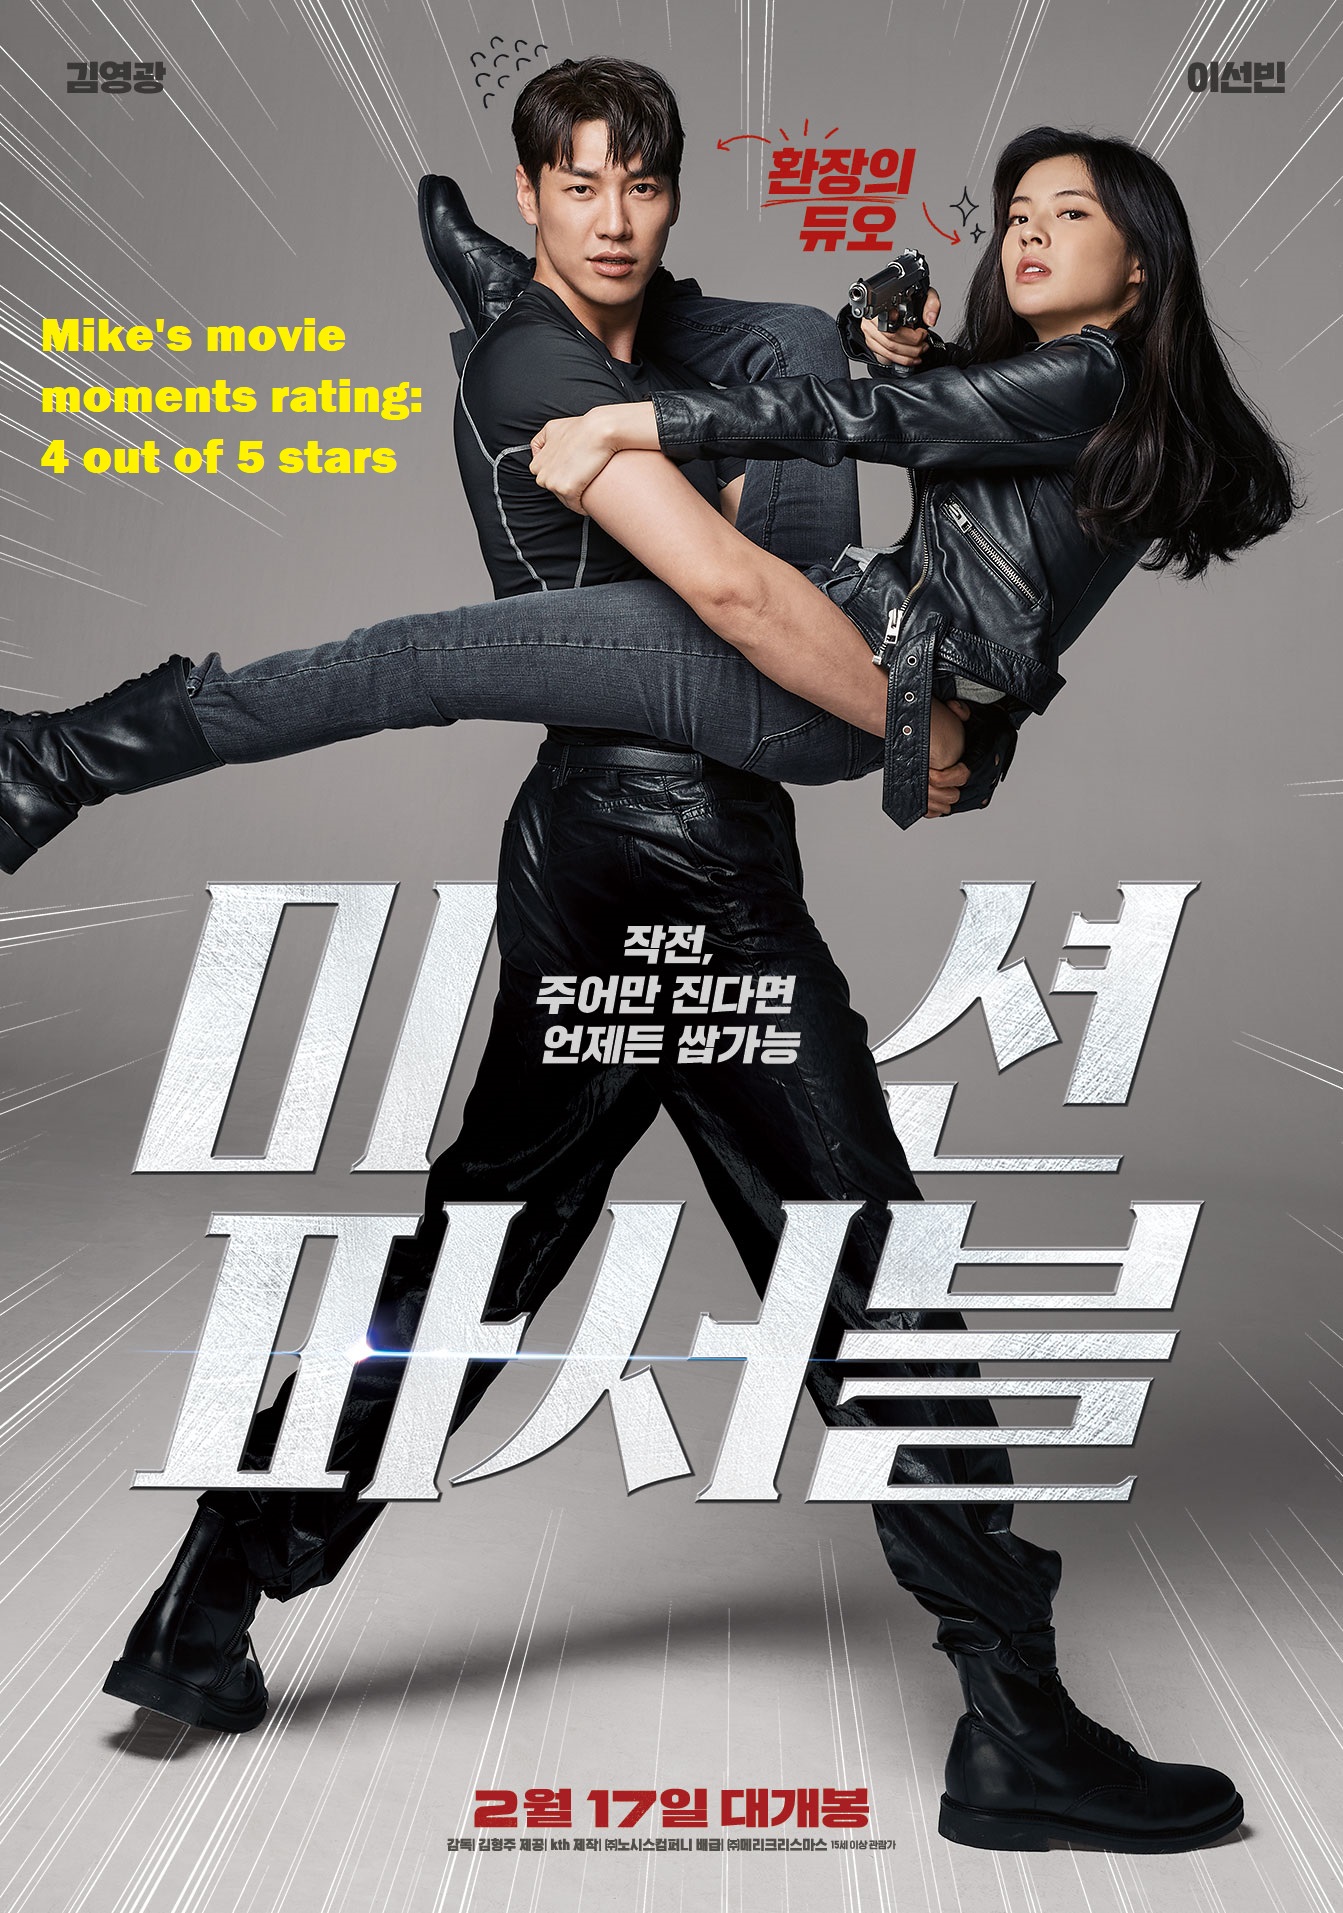 Mike's Movie Moments: Mission: Possible - Another Entertaining South Korean Action  Comedy Movie